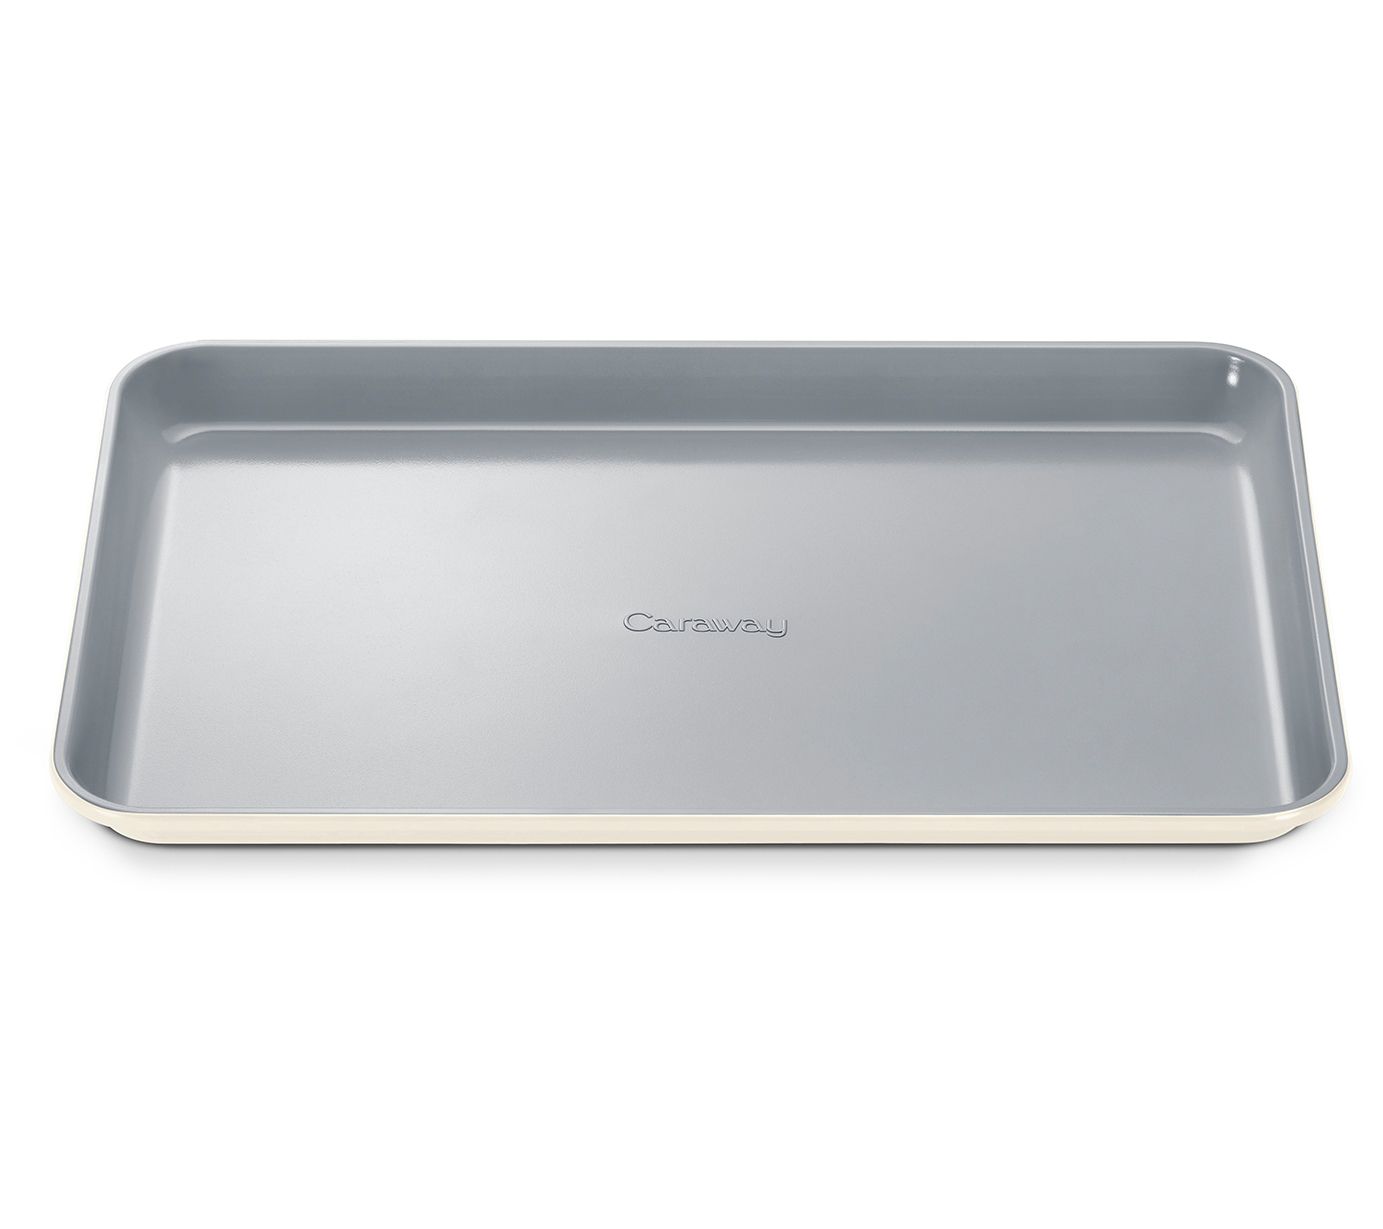 Baker's Secret Insulated Cookie Sheet Cookie Tray 16 x 14, Carbon Steel  Insulated Double Wall, for Baking Roasting Cooking, Dishwasher Safe Home Baking  Supplies Accessories - Essentials Collection